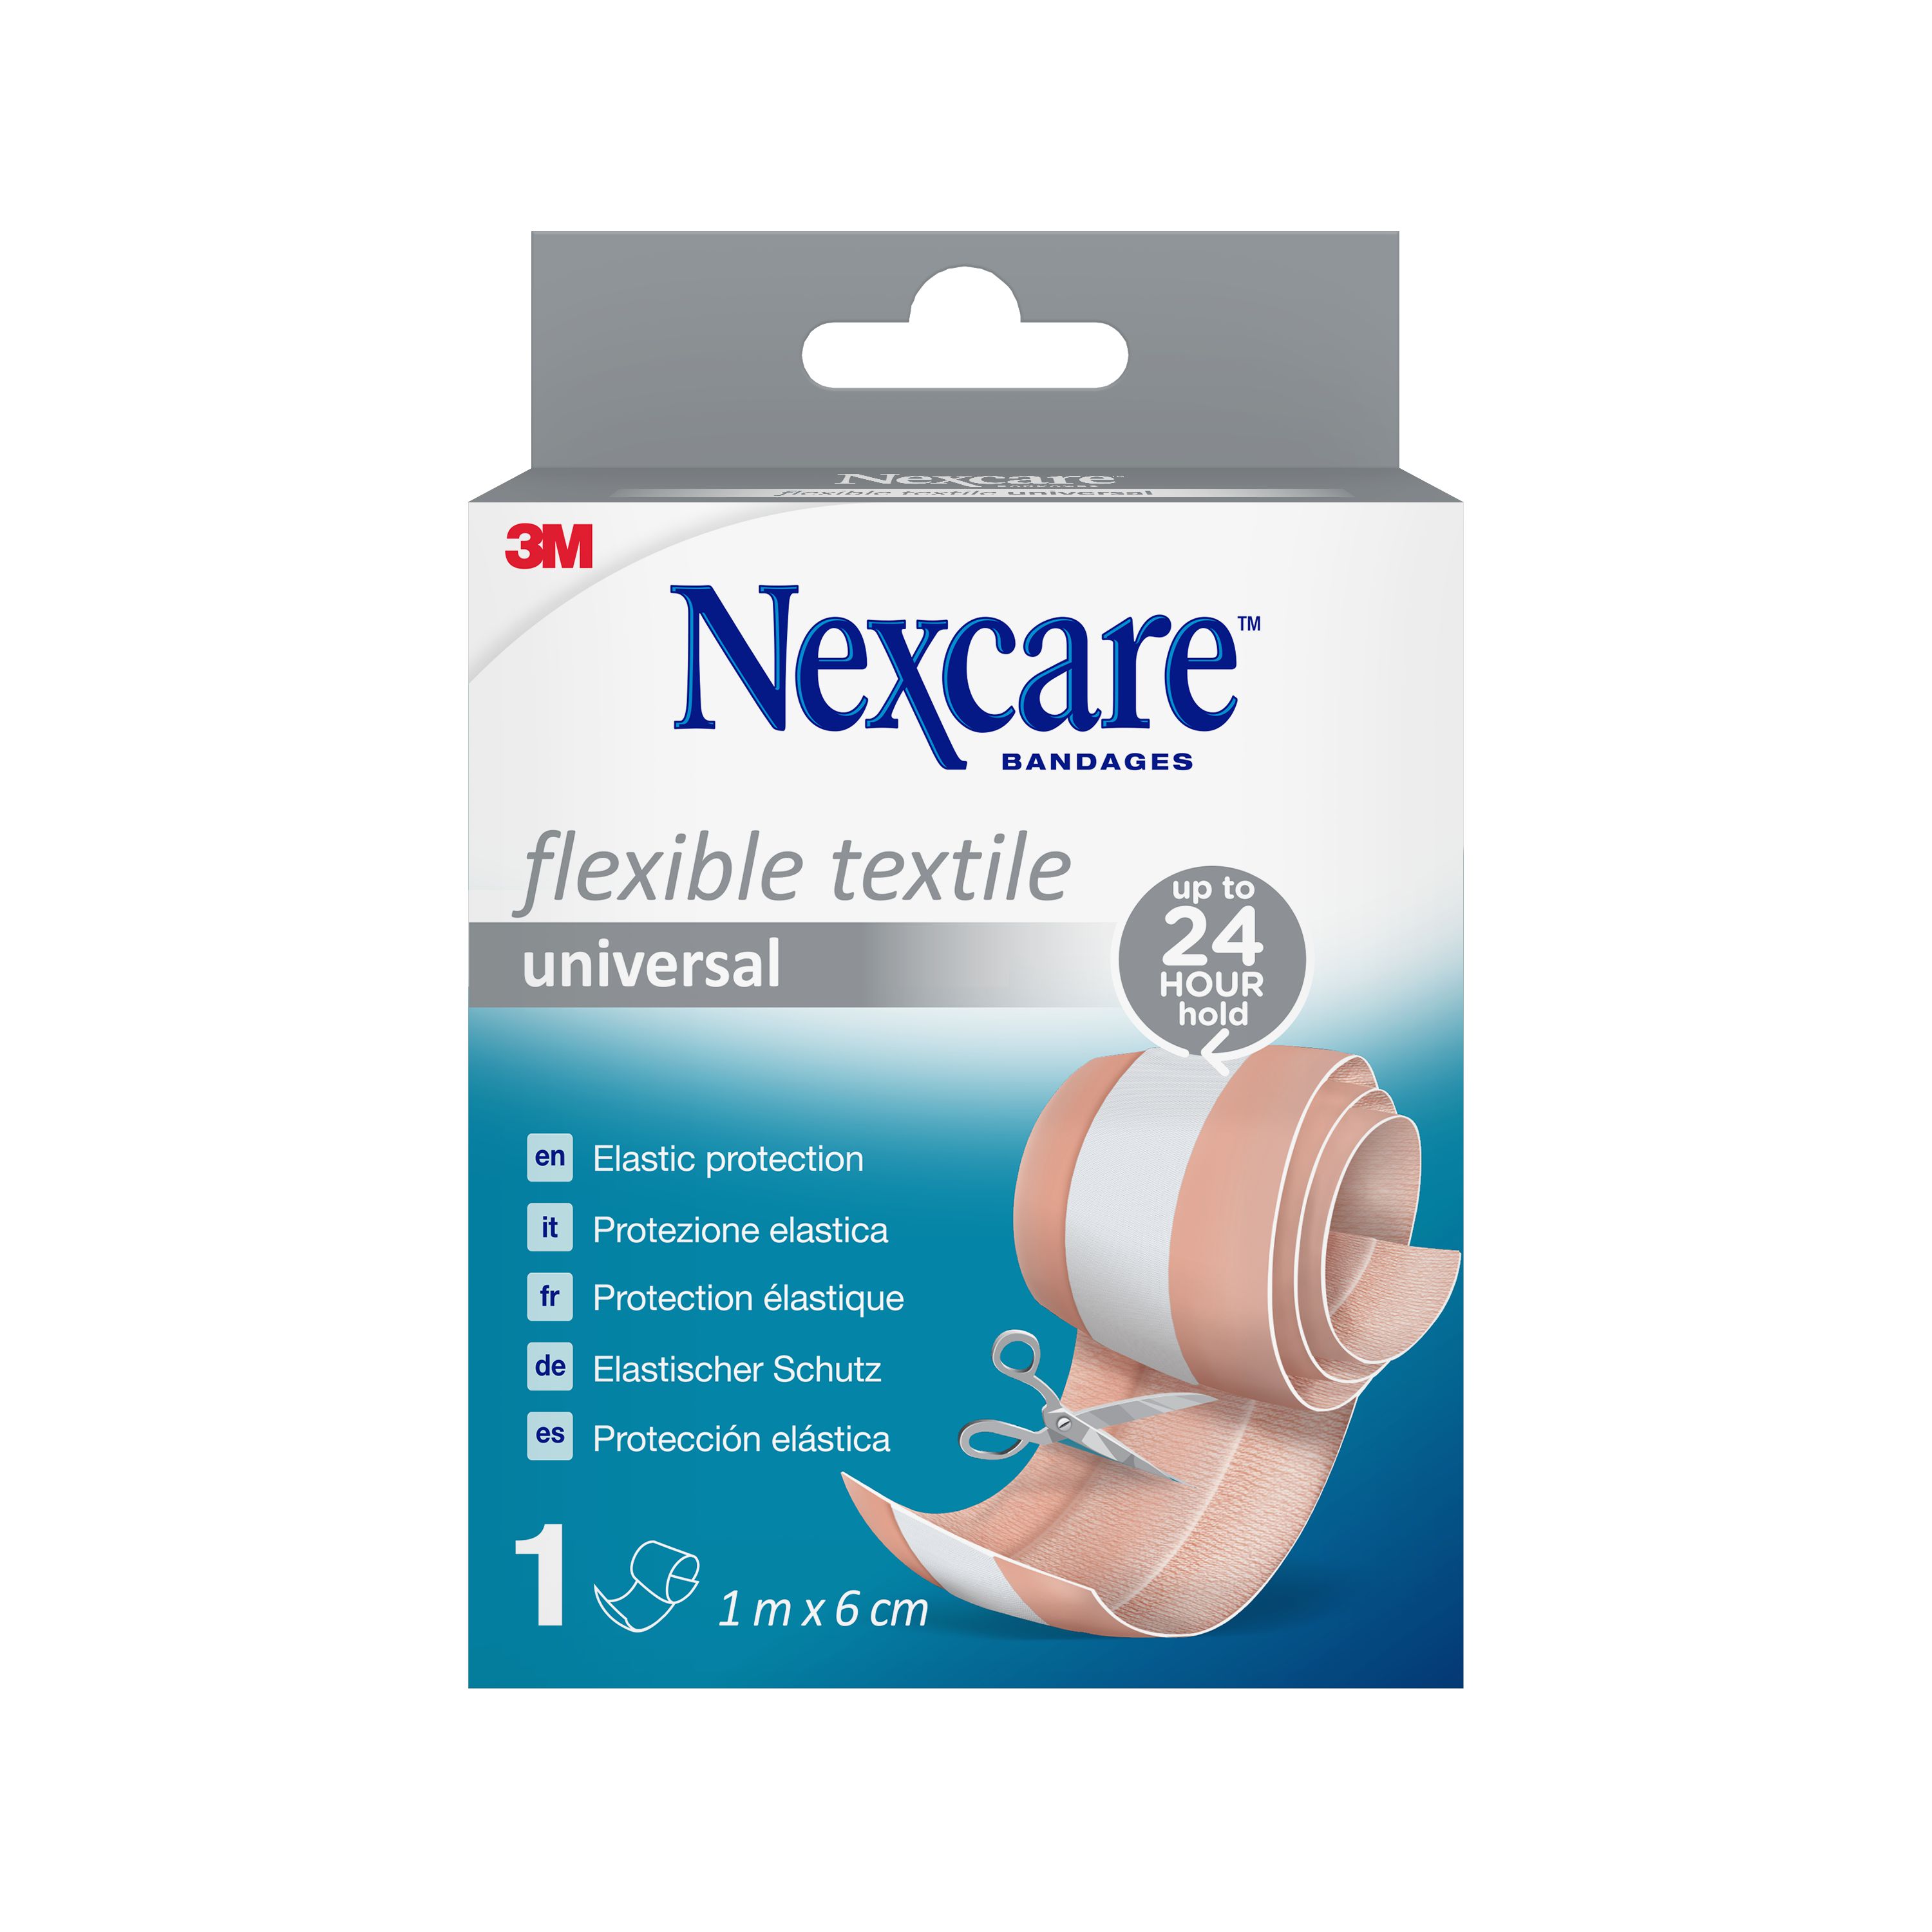 Nexcare™ Flexible Textile Universal Band Pflaster, 1 m x 6 cm, 1/Packung